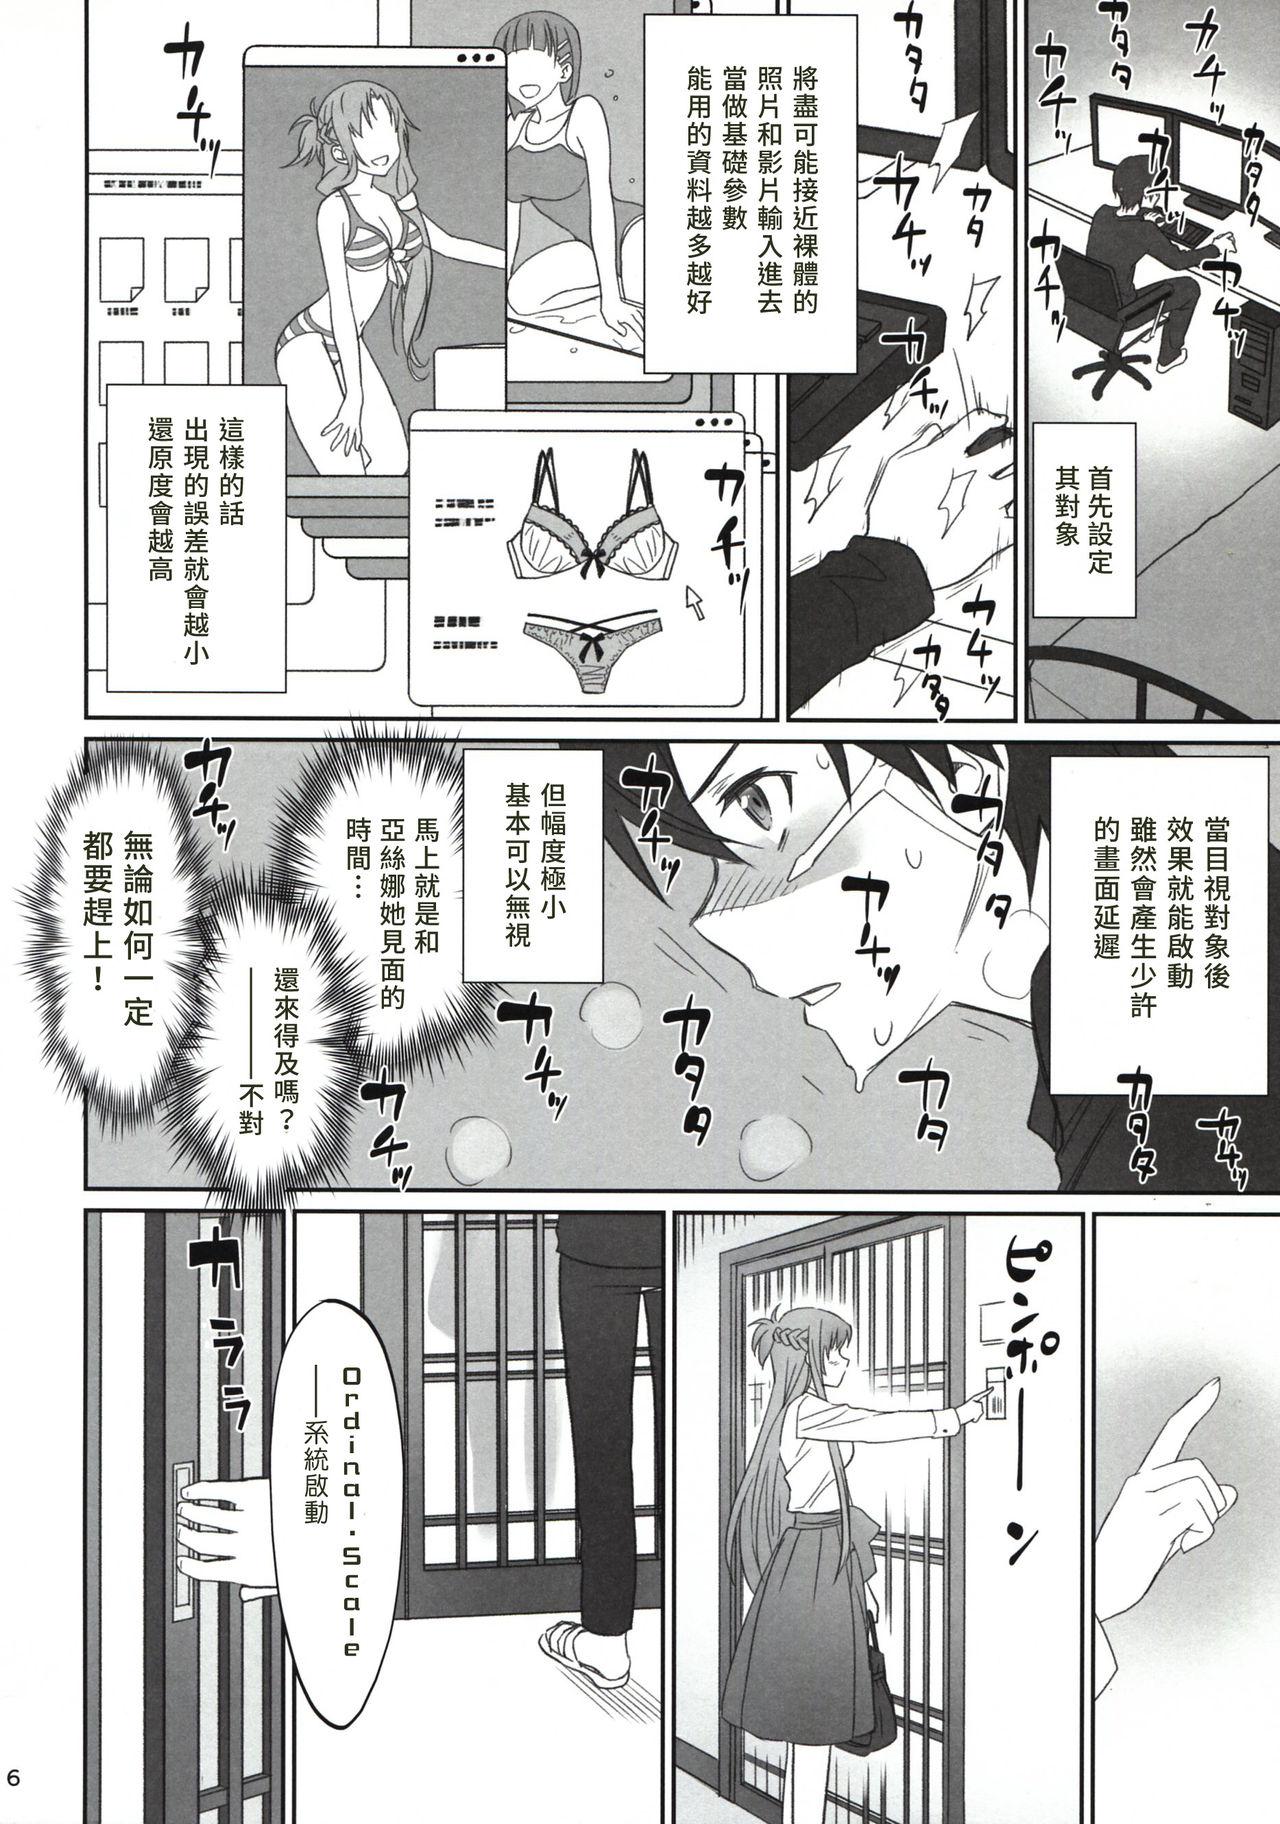 Sister Voyeuristic Disorder - Sword art online Muscles - Page 6